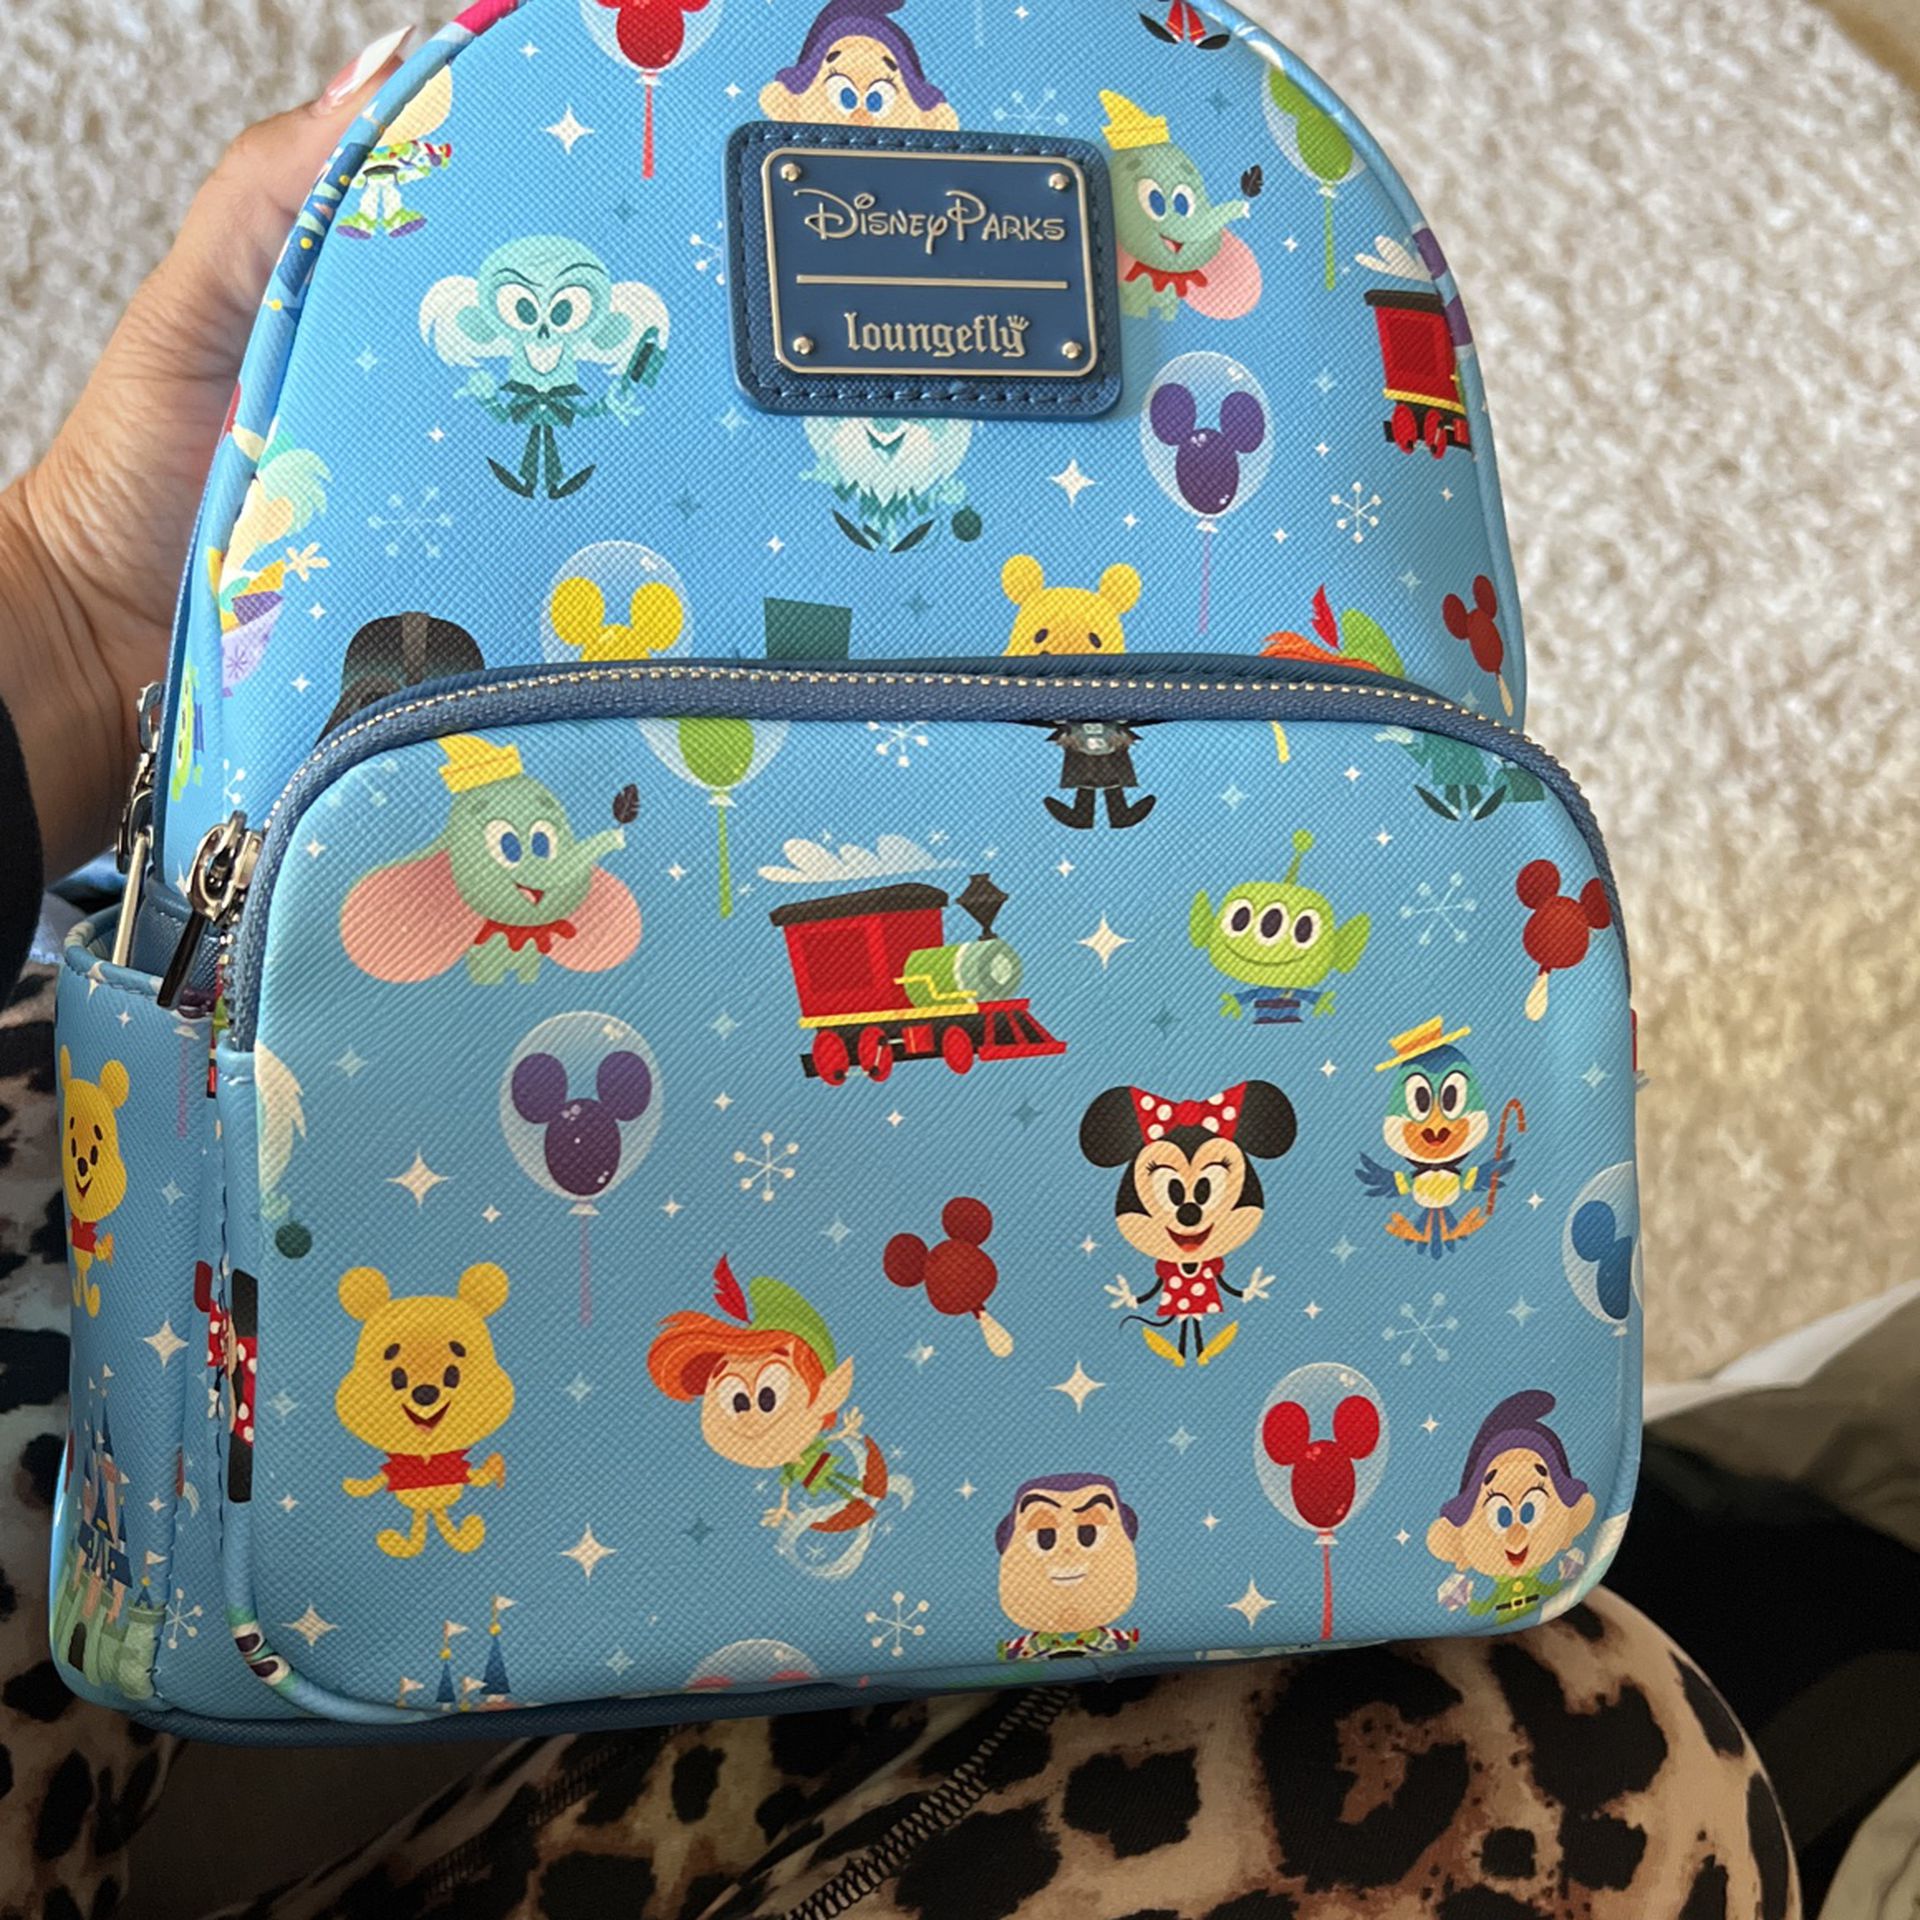 Loungefly Disney Parks Backpack